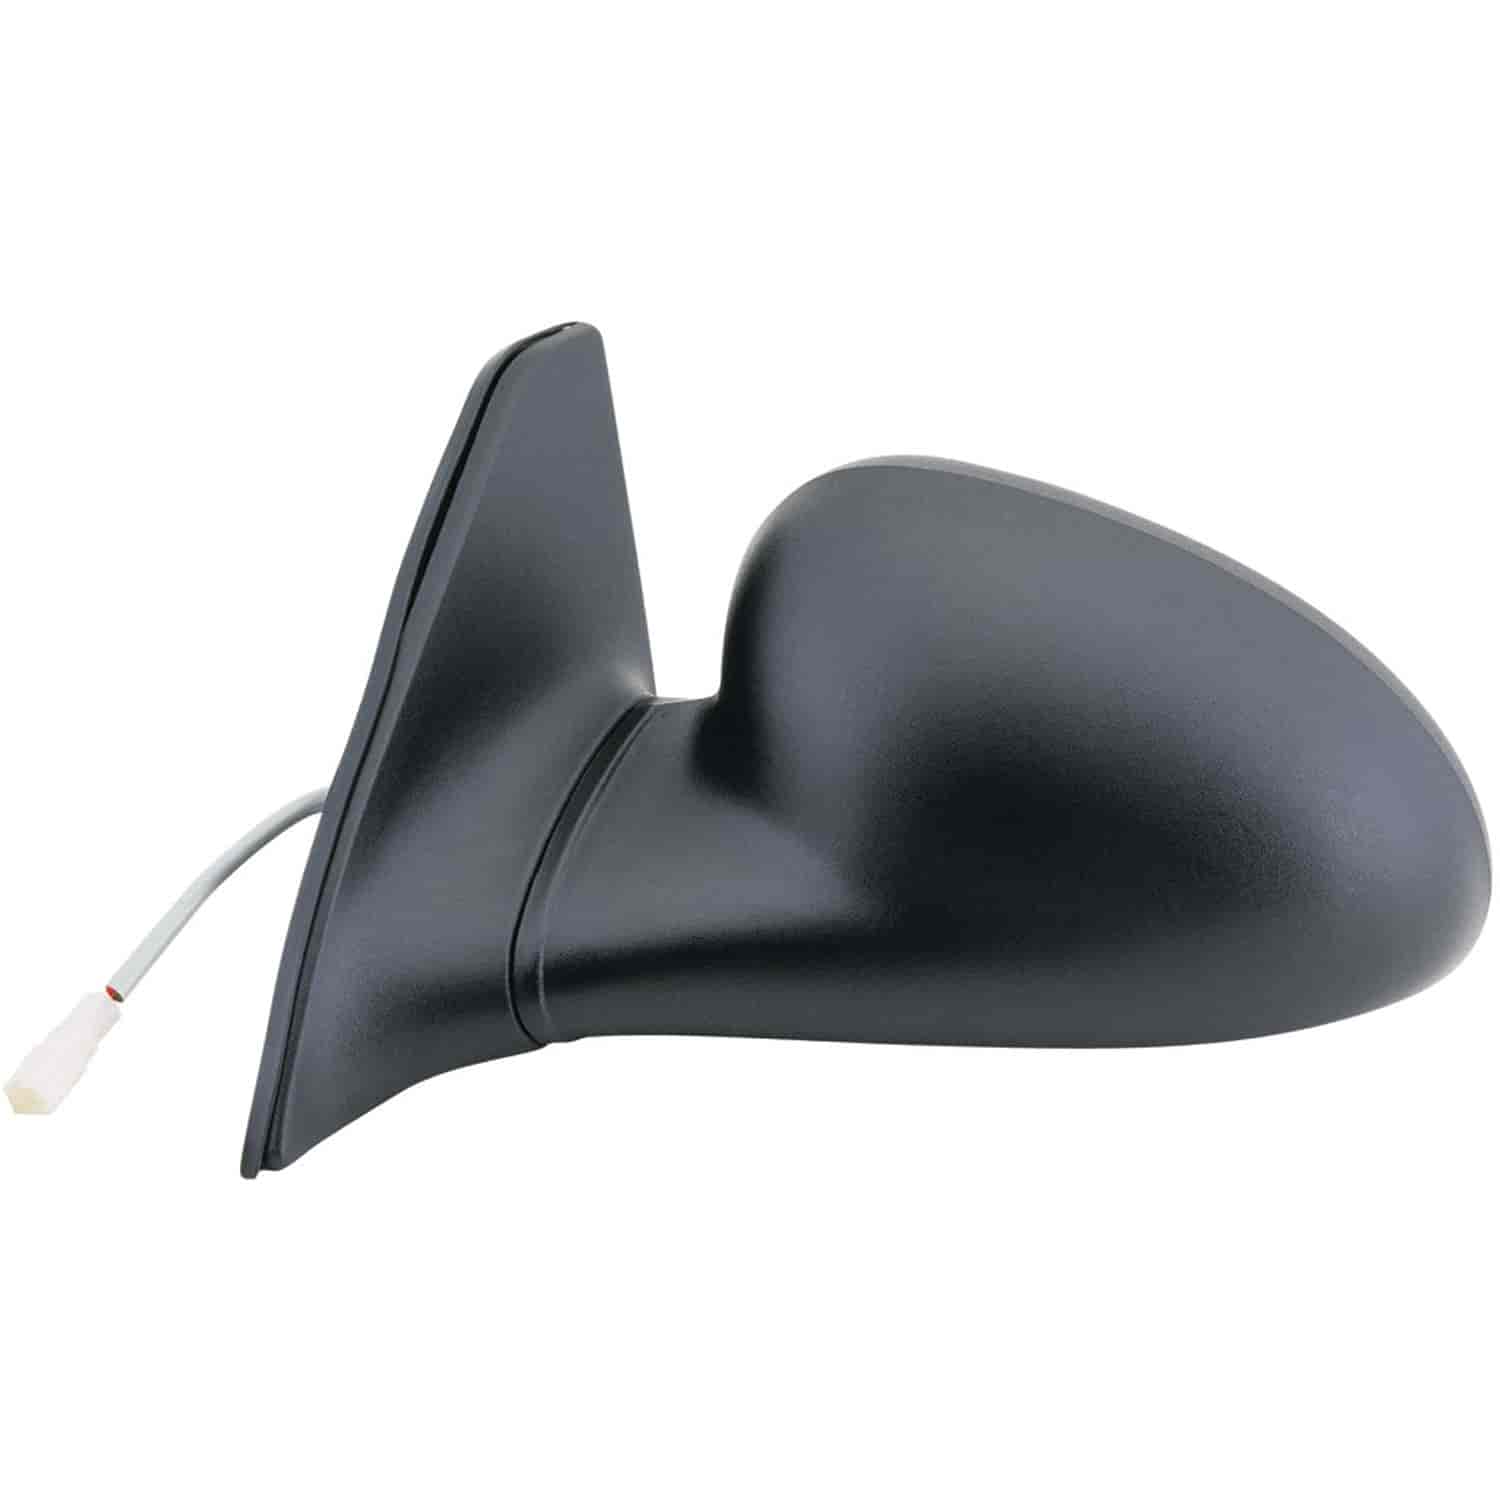 OEM Style Replacement mirror for 97-02 Ford Escort Sedan Mercury Tracer driver side mirror tested to